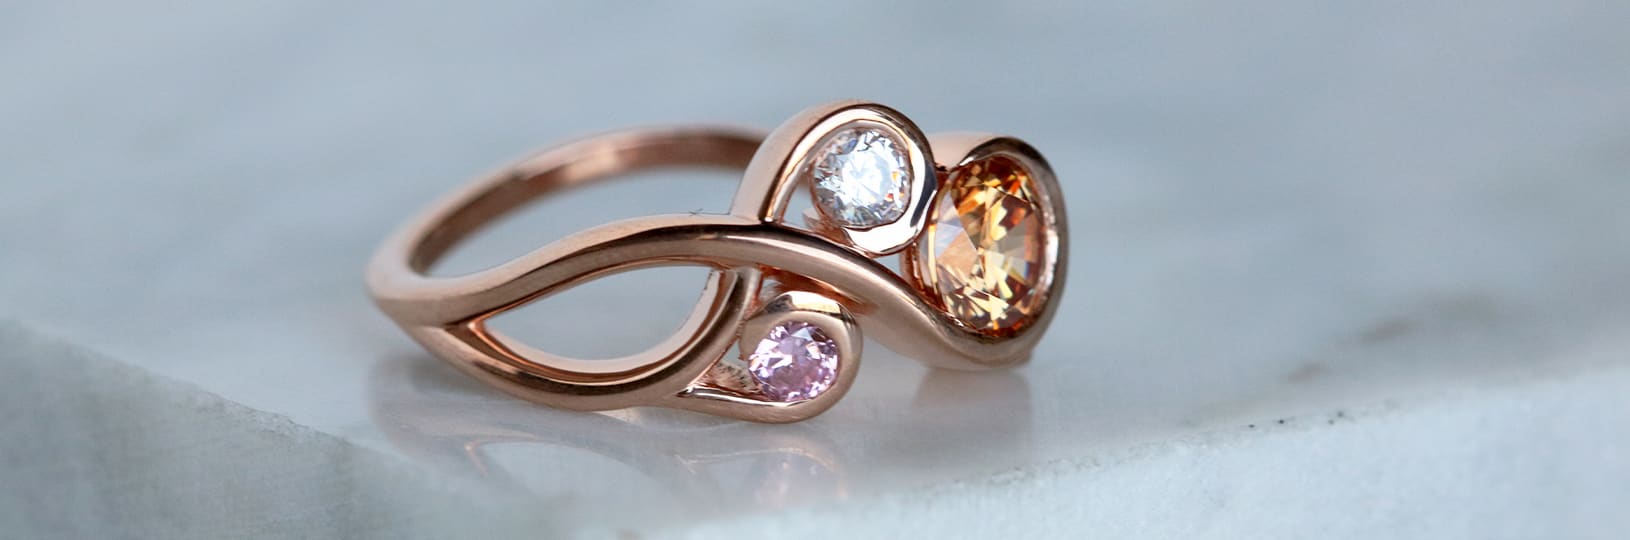 An engagement ring with colorful gemstones